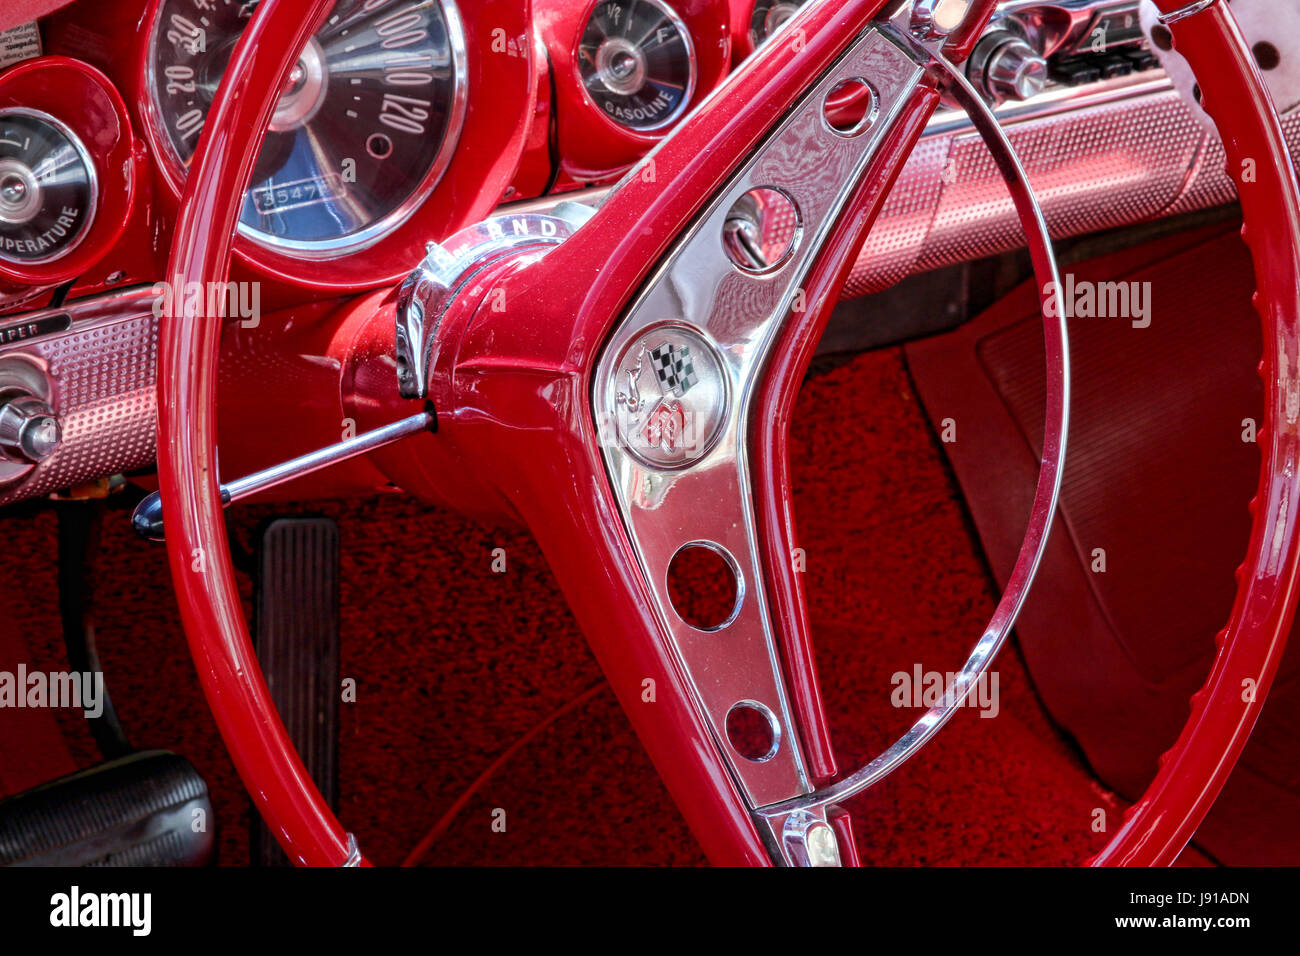 Classic Car Show at a festival in Menomonee Falls WI, Red interior of an Impala Stock Photo